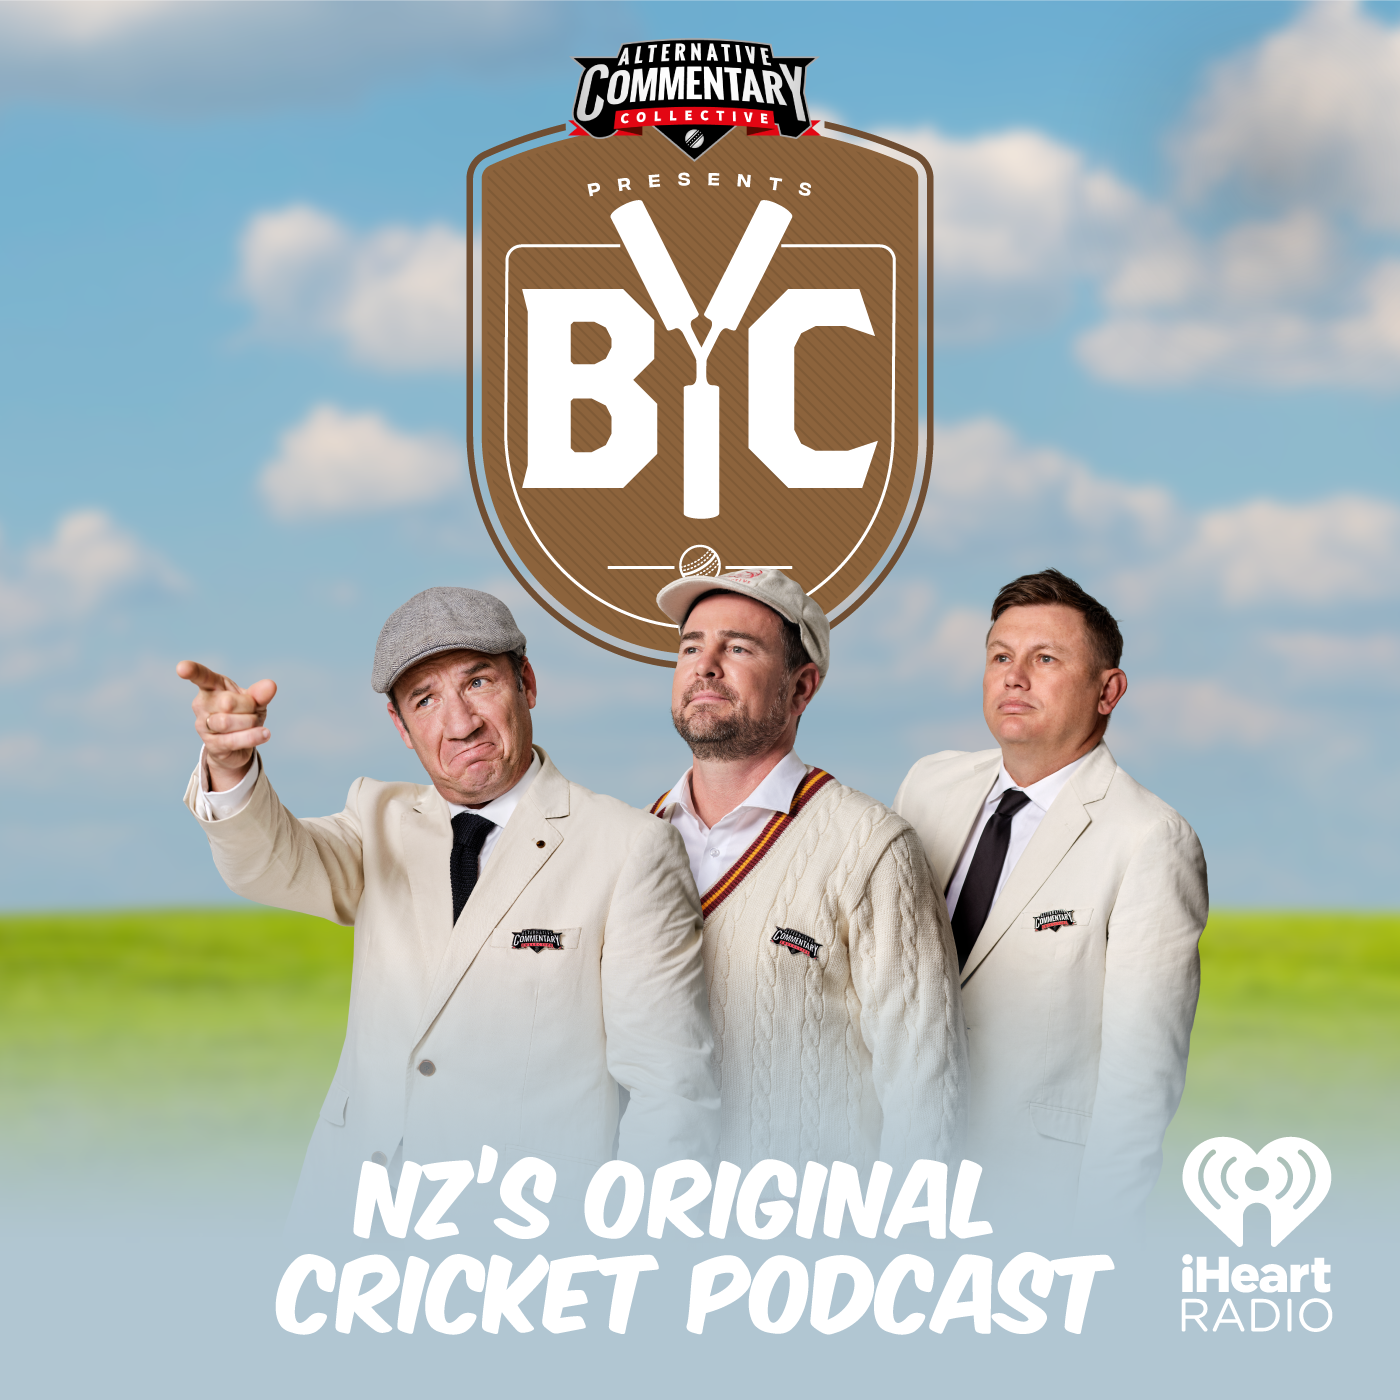 "NZ Vs Eng 2nd Test Special - Notes From The Basin: Day 3"